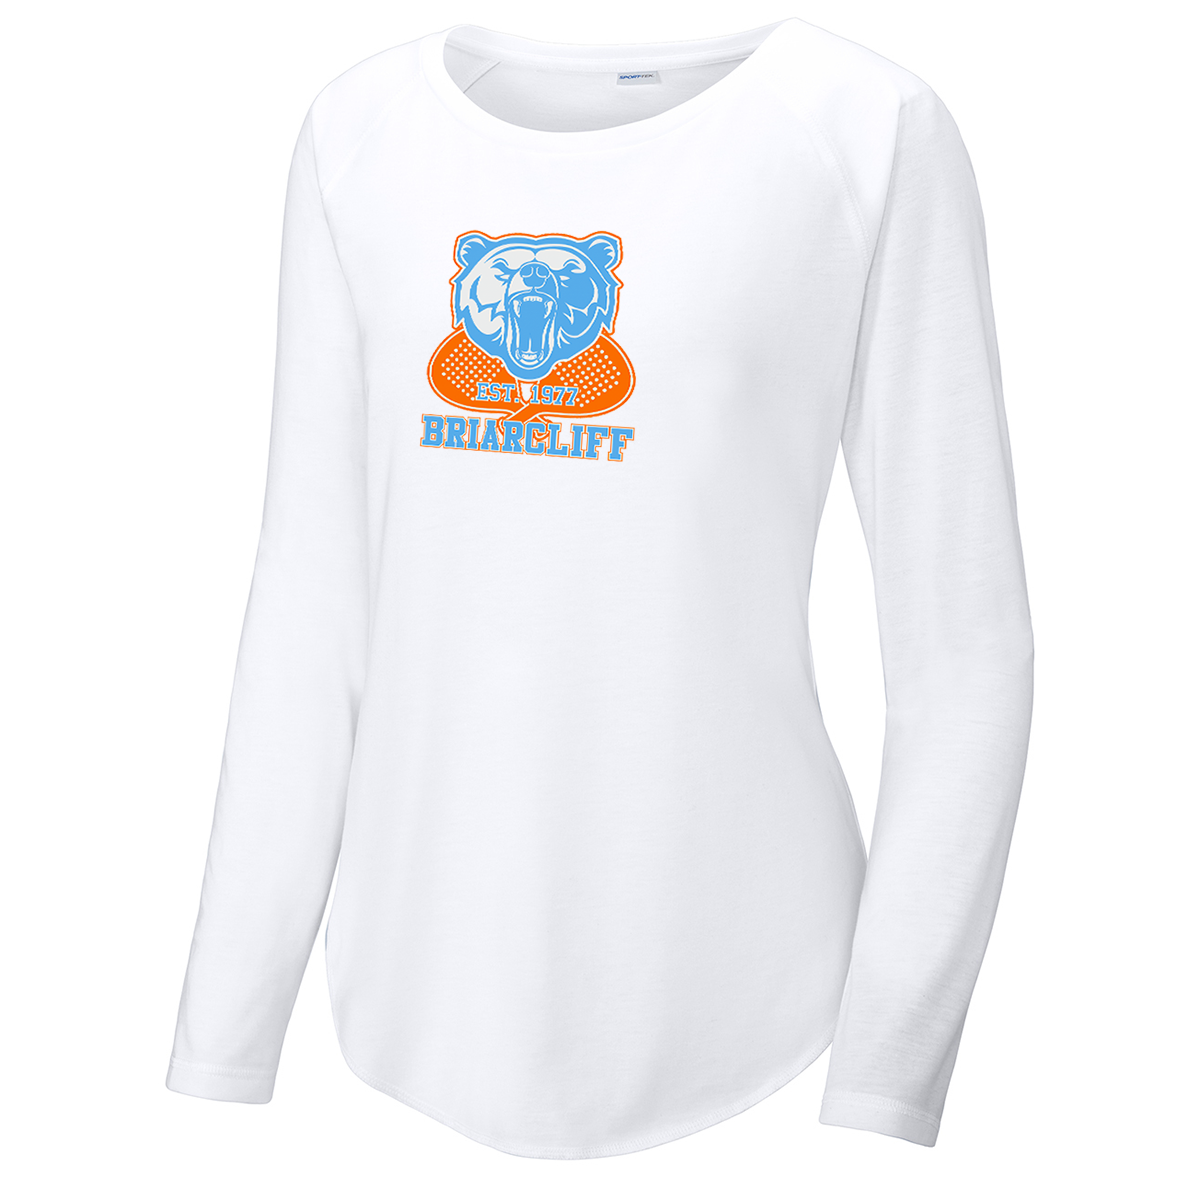 Briarcliff Paddle Women's Raglan Long Sleeve CottonTouch